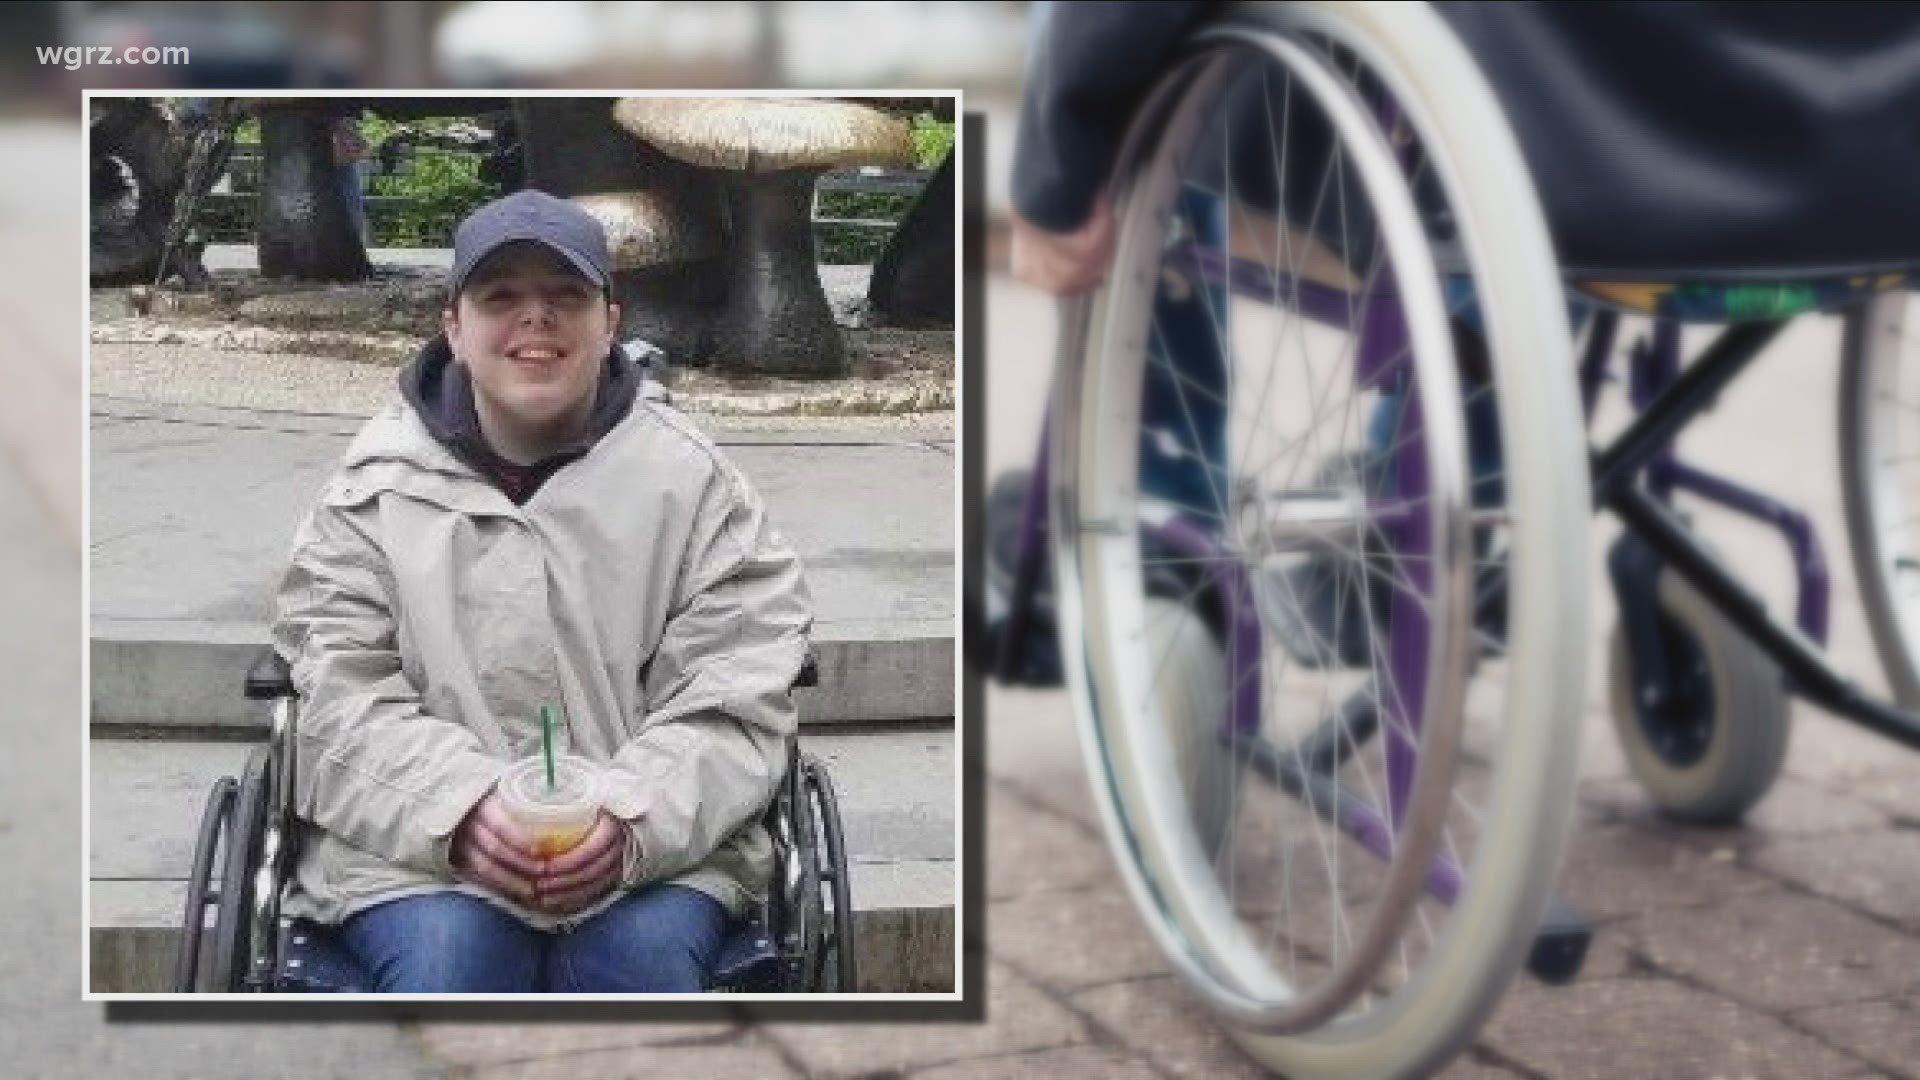 It's been three days since a hit-and-run crash that sent a man to the hospital as he was pushing a woman in a wheelchair.